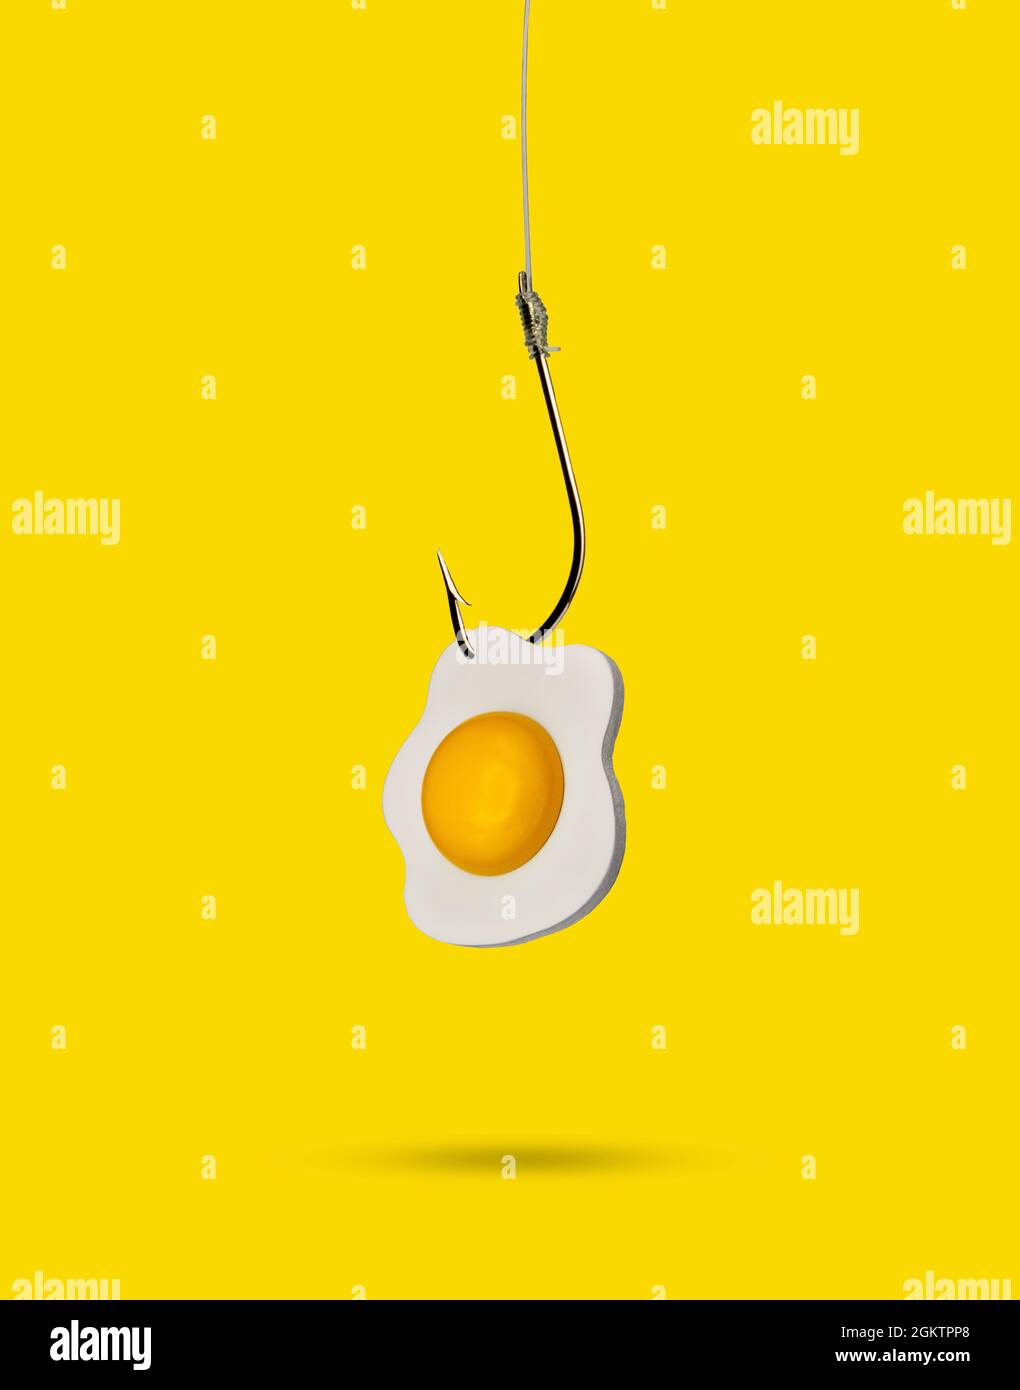 Fried egg on a fishing hook. Minimal food concept. Stock Photo